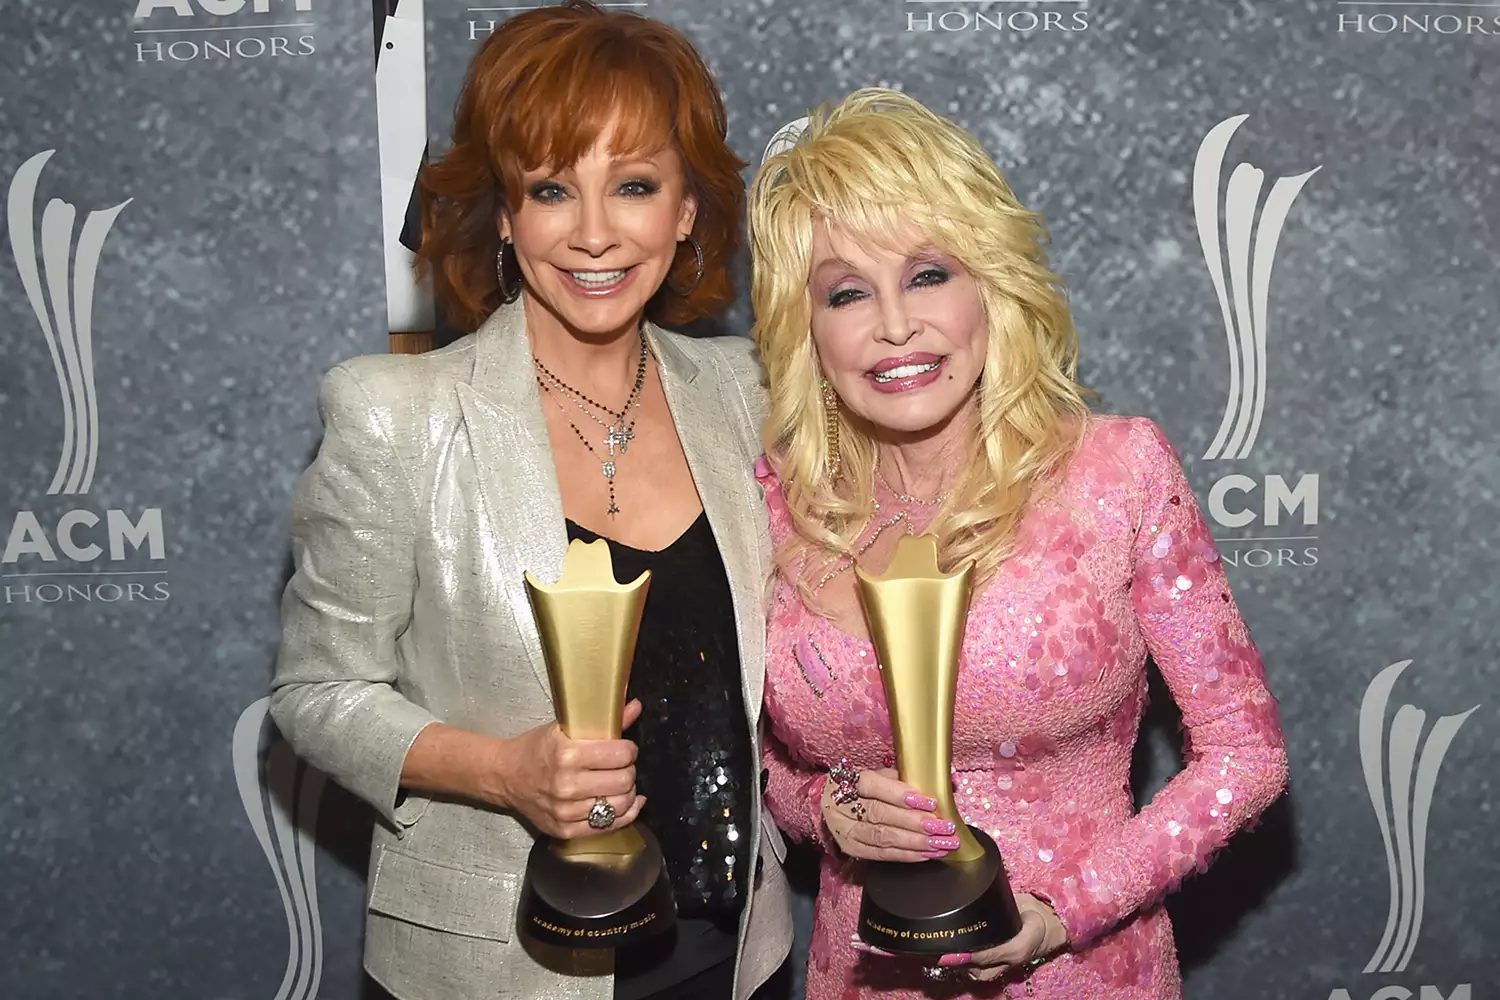 Reba McEntire Says Stylists tried to Change Her Look